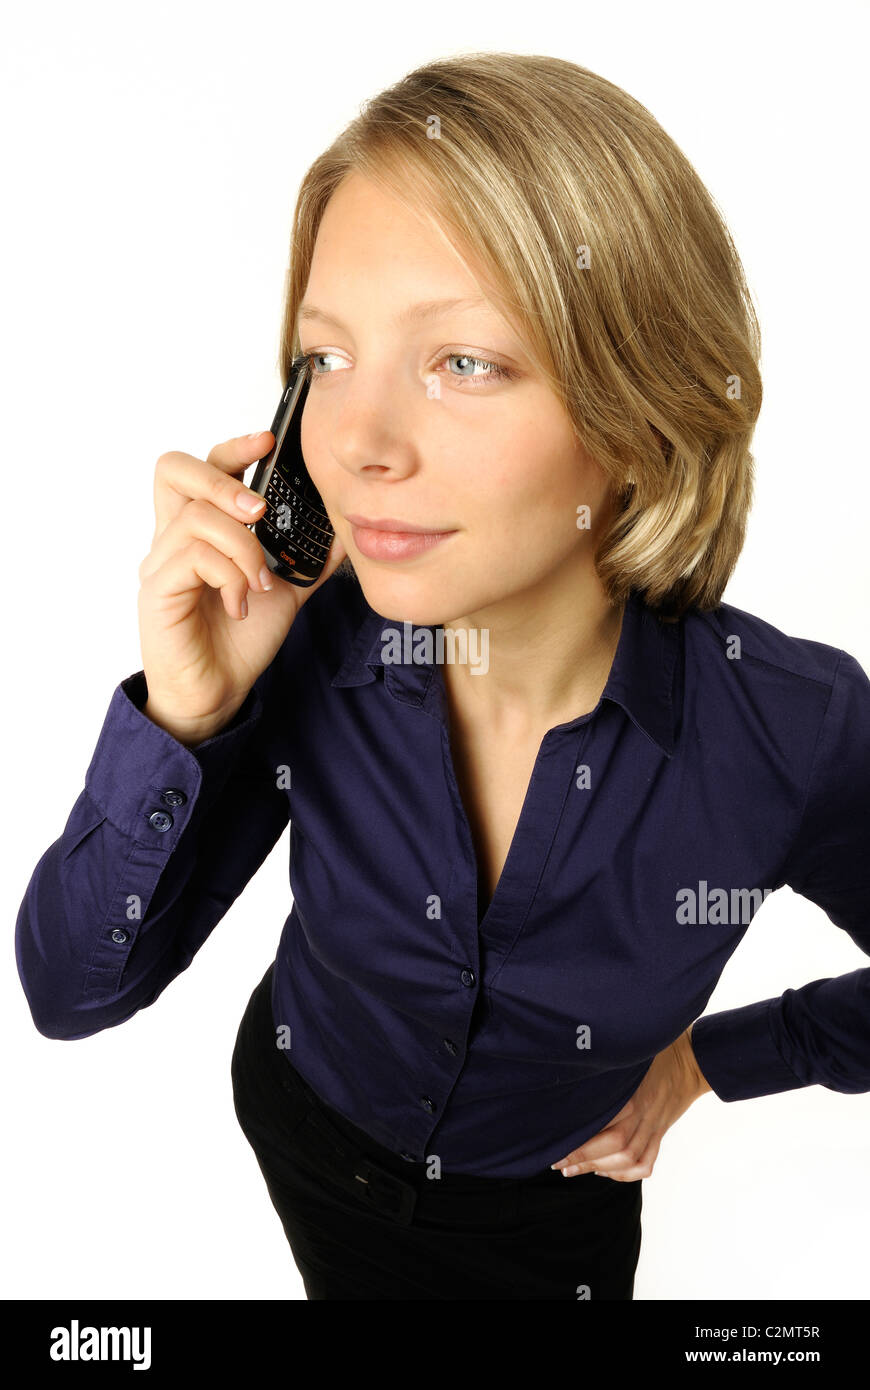 Young woman making a call on a mobile phone Stock Photo